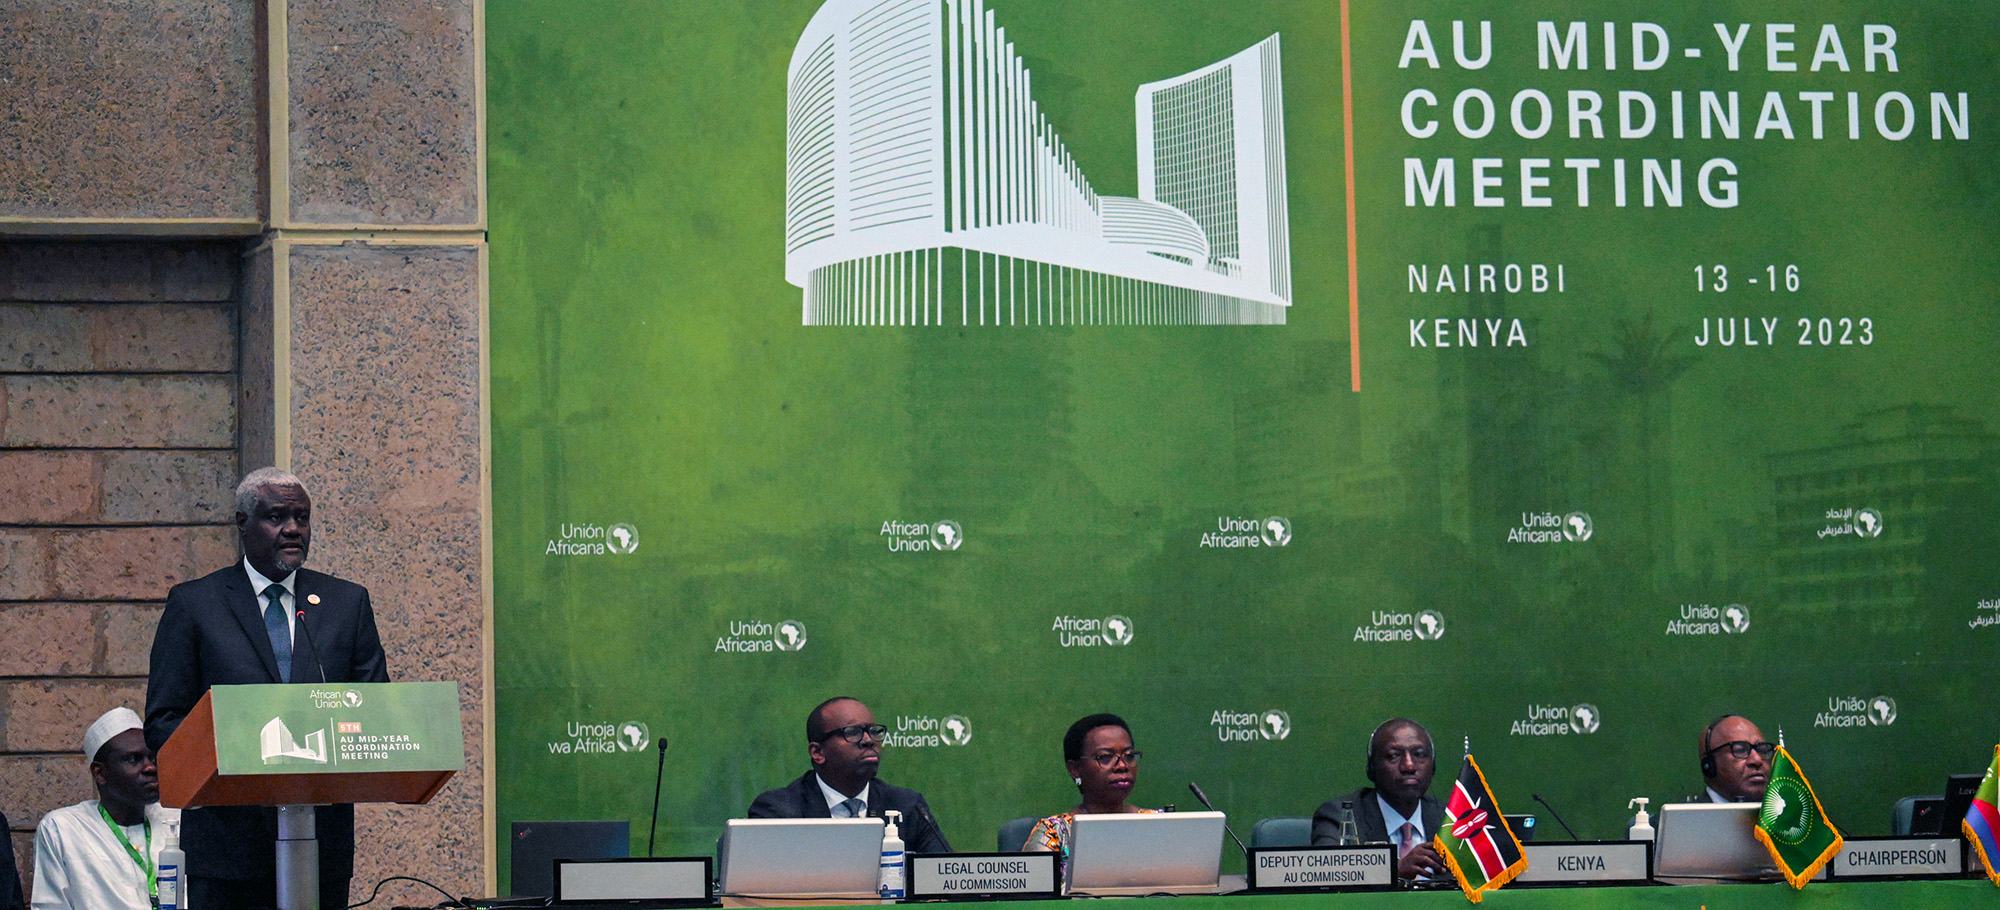 Mid-year coordination meeting of the African Union